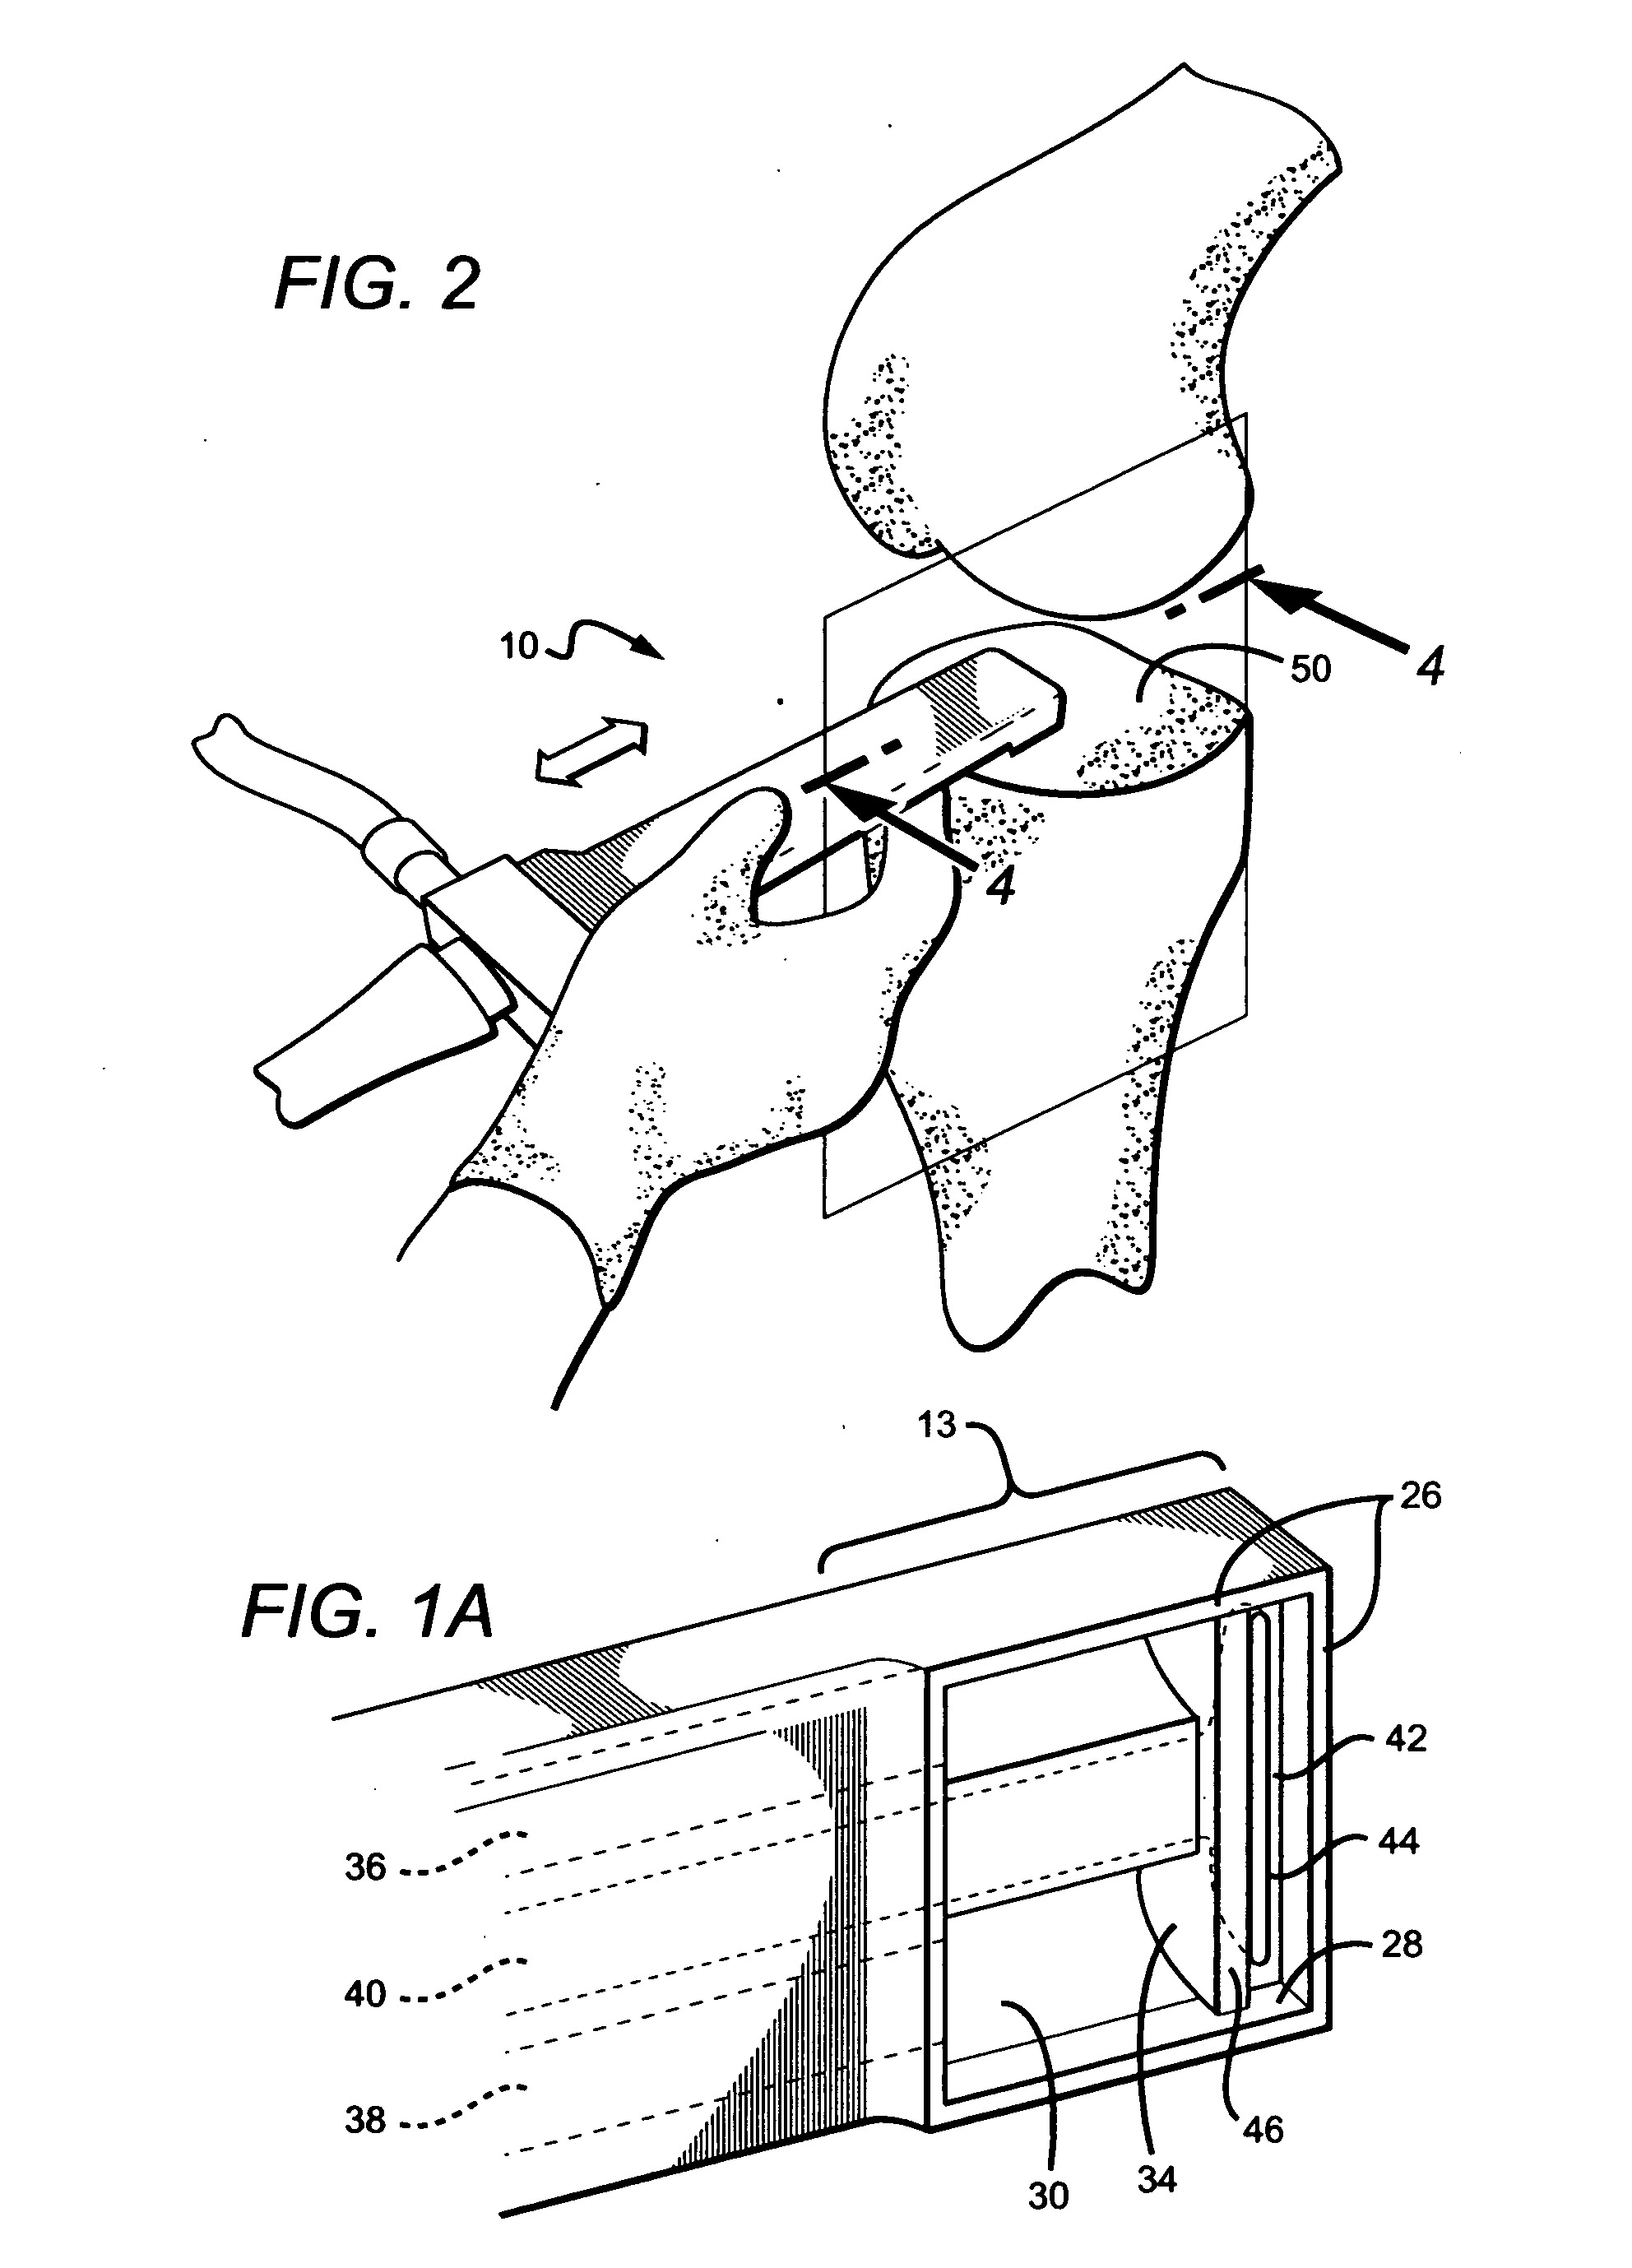 Apparatus and method for cleaning a surgically prepared bone surface